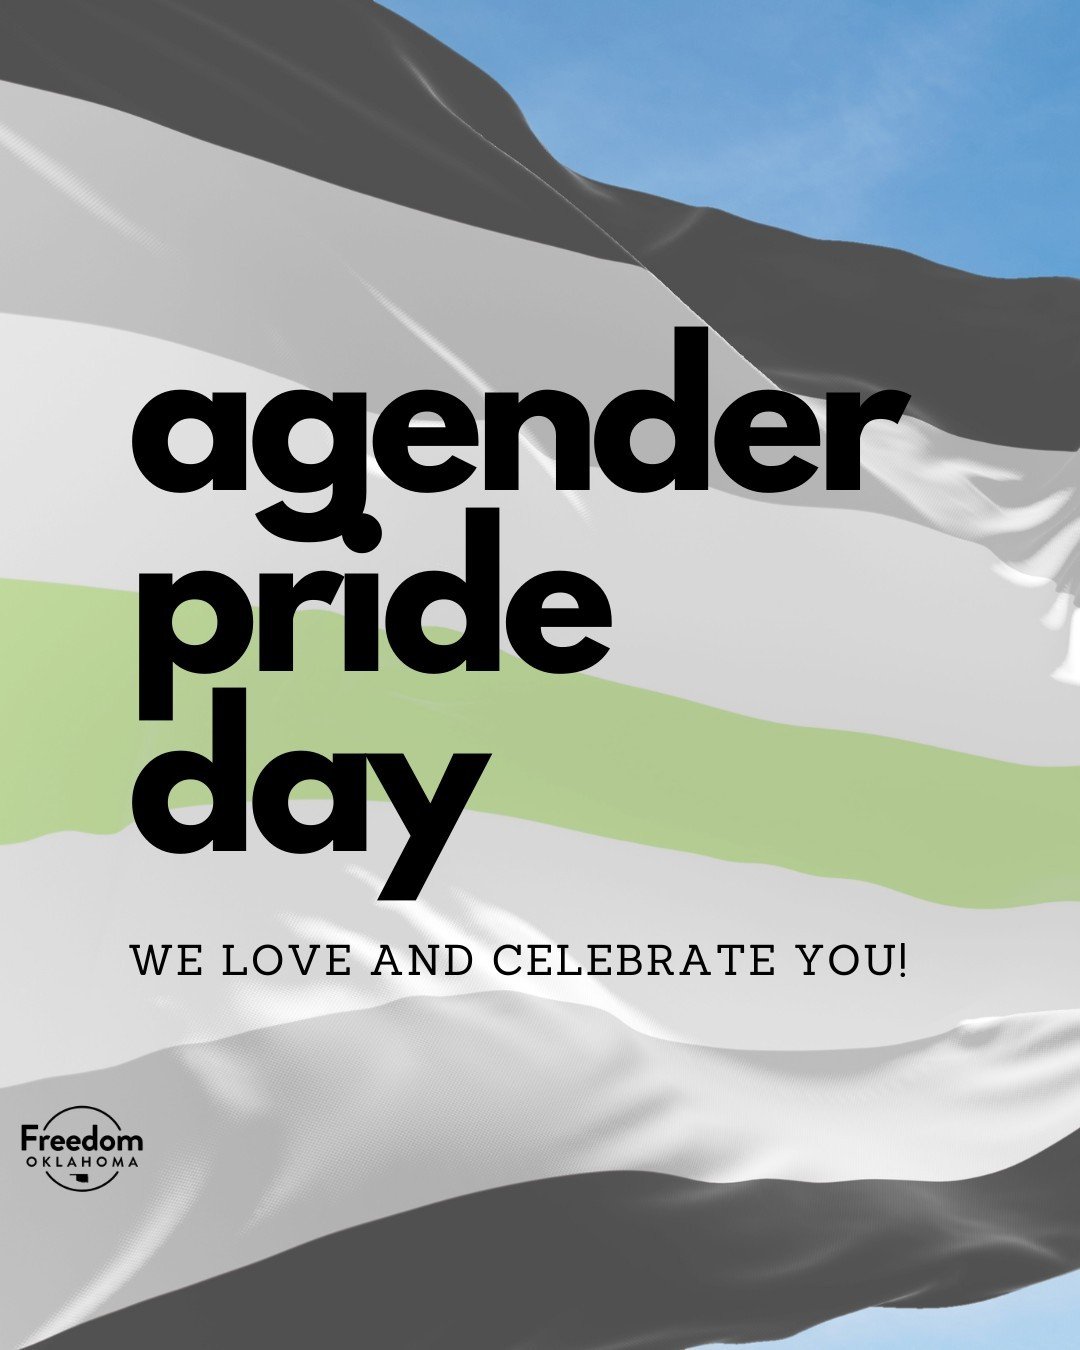 Happy agender pride day! We love and celebrate you!

We remind everyone today that Agender people can have any preference for pronouns (including he/she/they/ze), and some prefer to avoid using gendered language when referring to themselves. Agender 